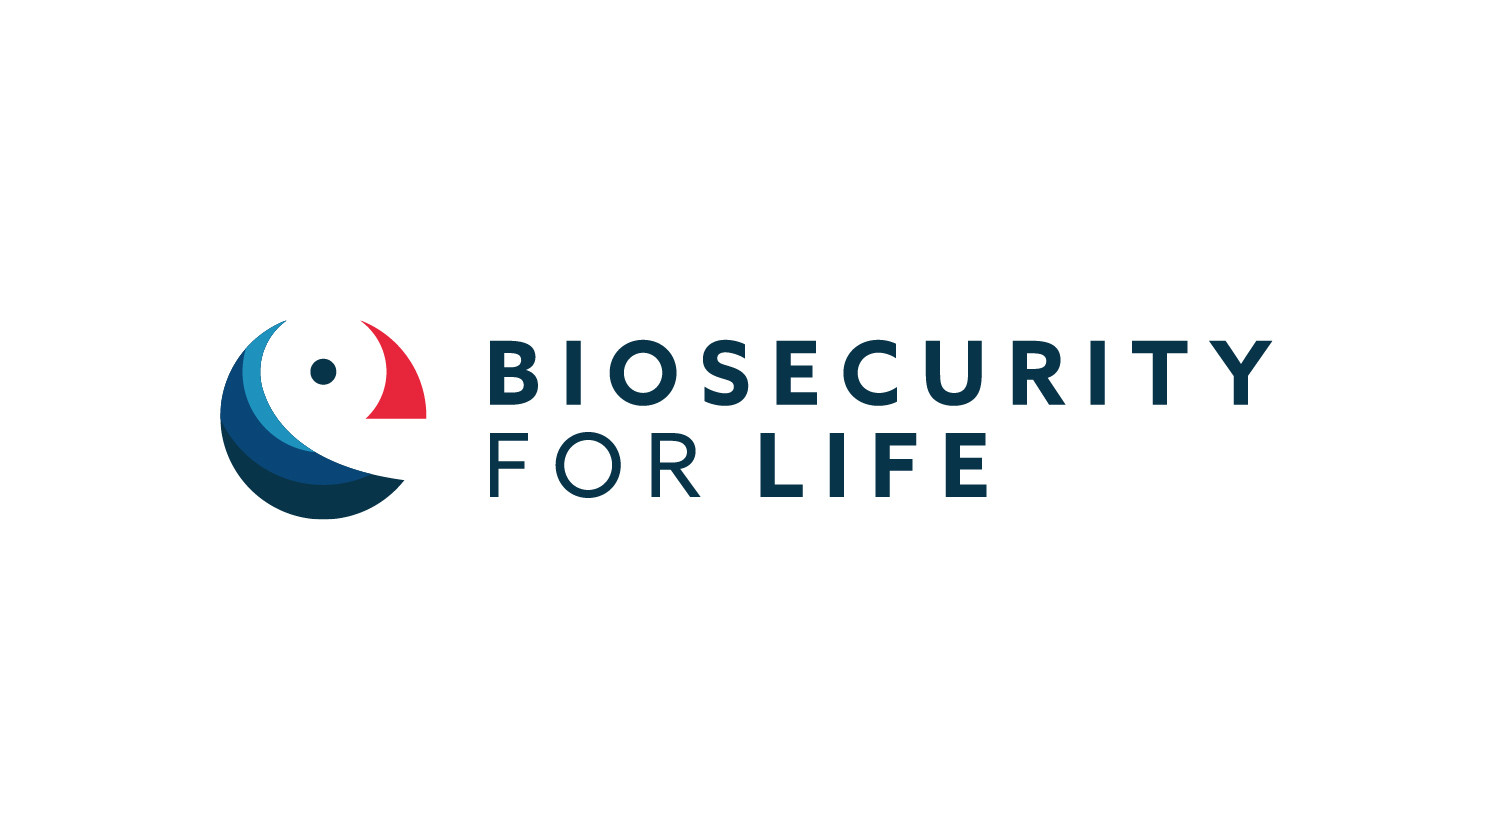 Biosecurity for life logo design by root studio 01